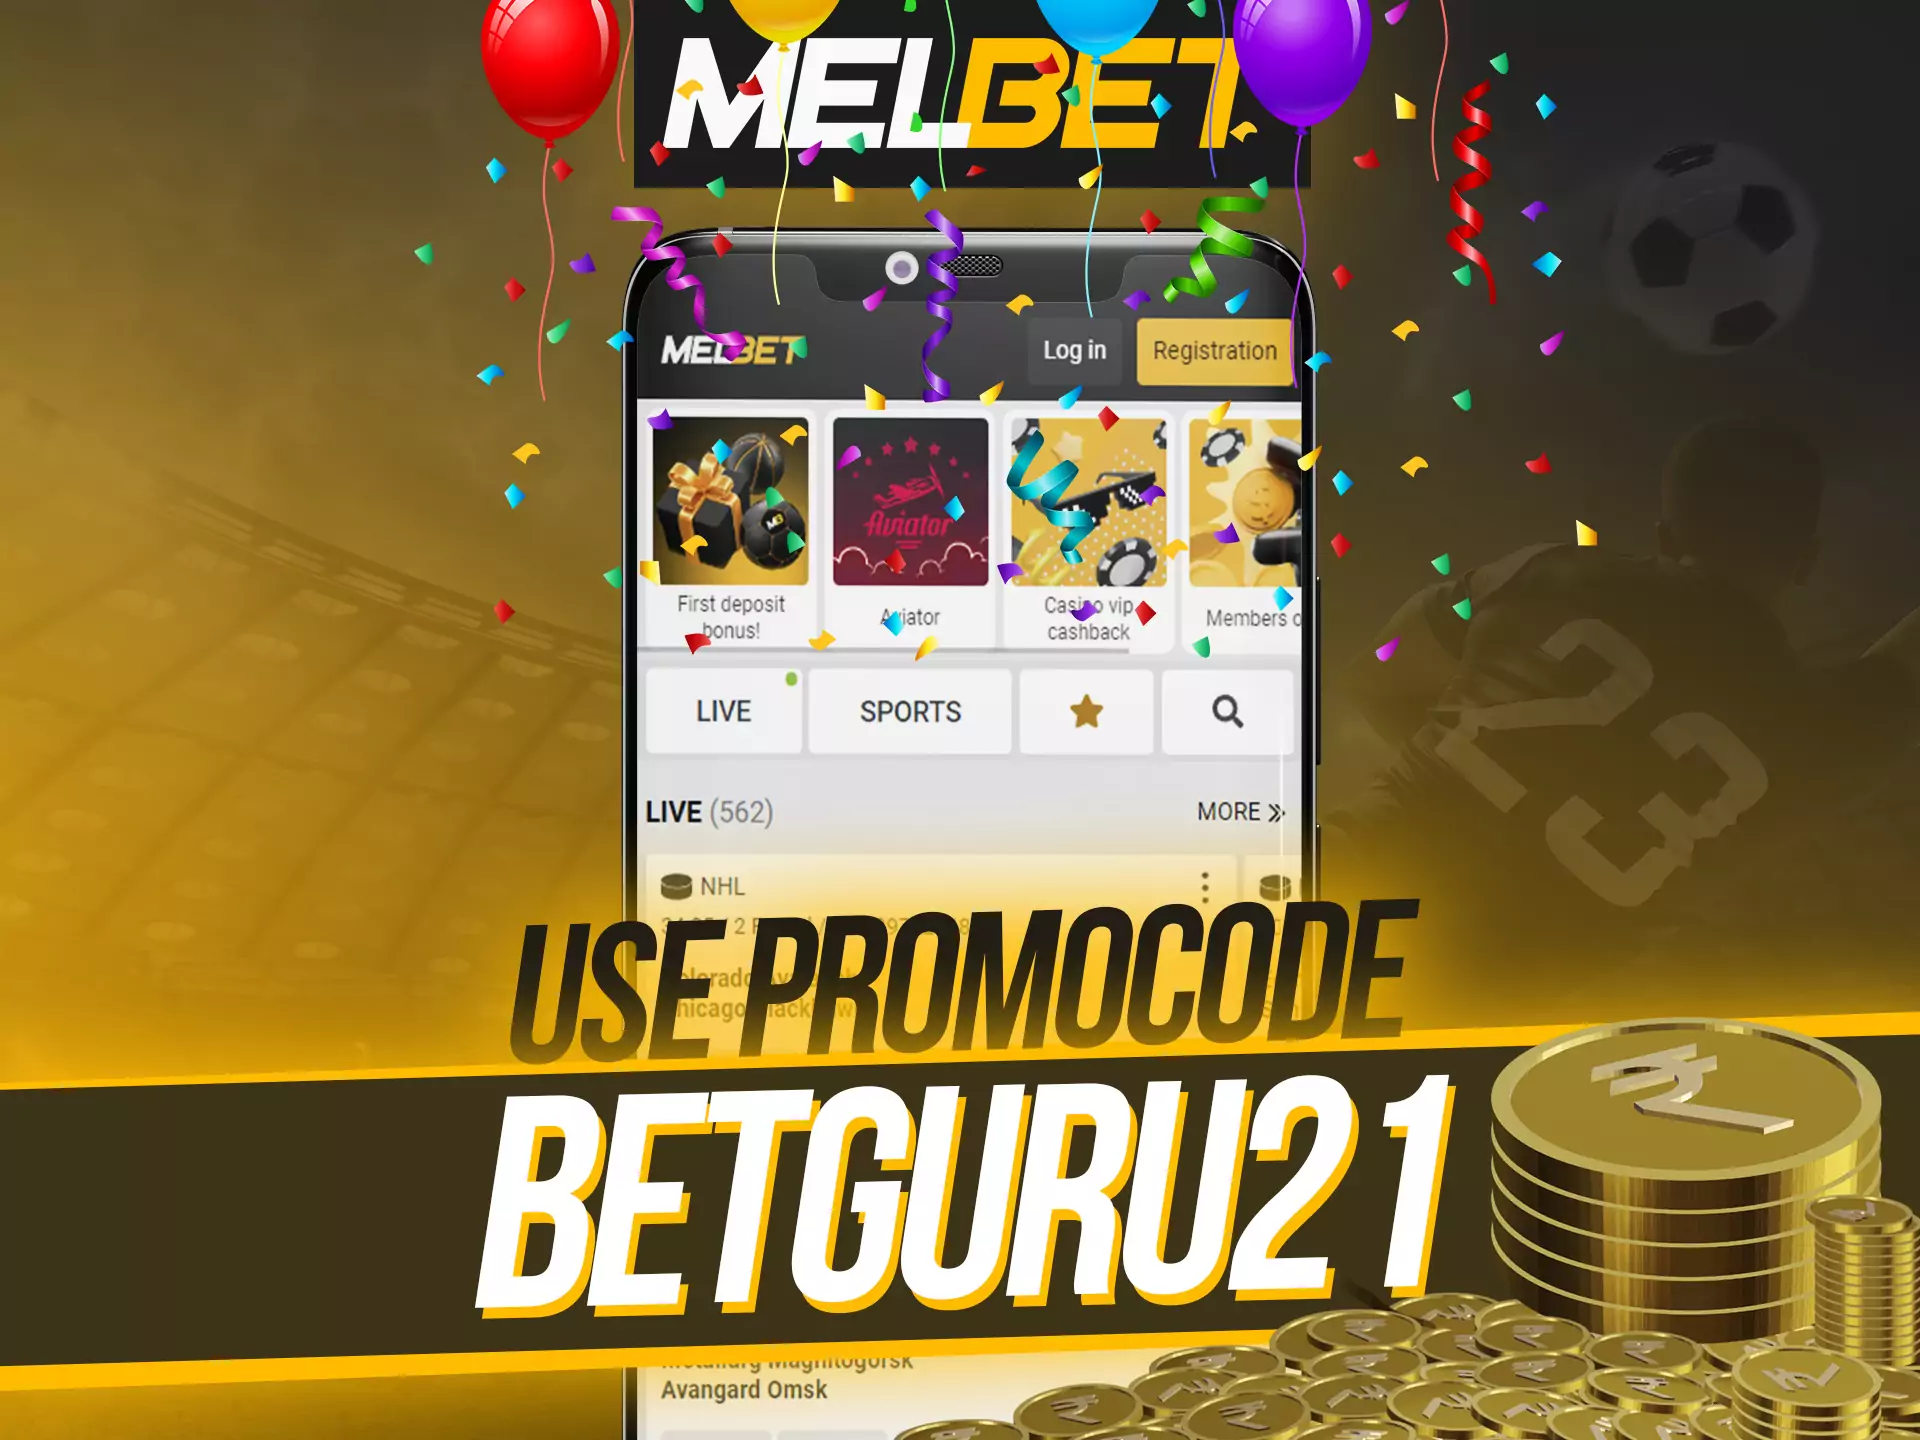 In the Melbet app, be sure to apply a special promo code.